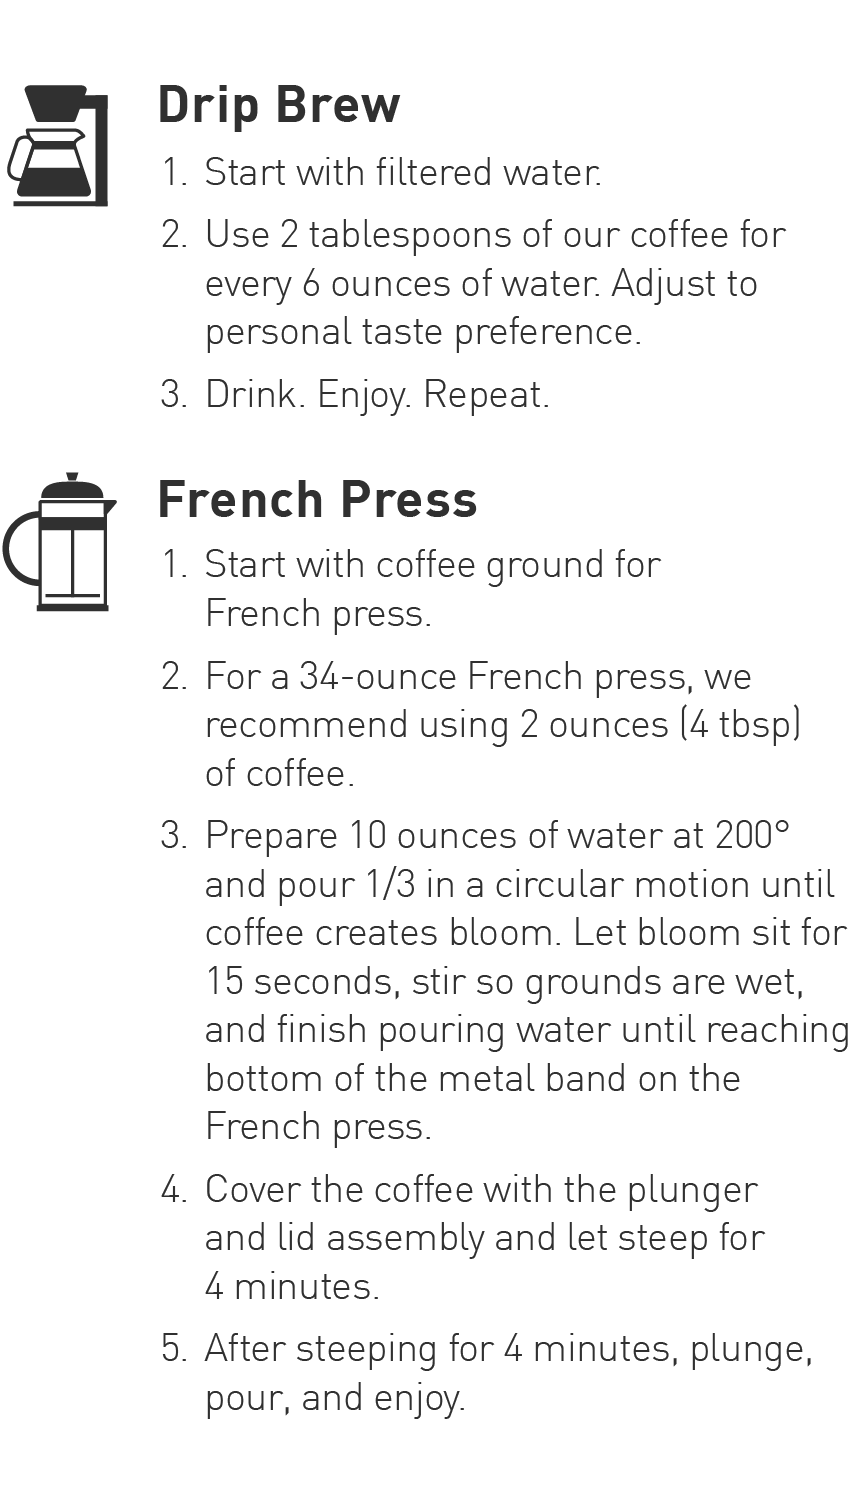 Drip Coffee and French Press Brewing Guide